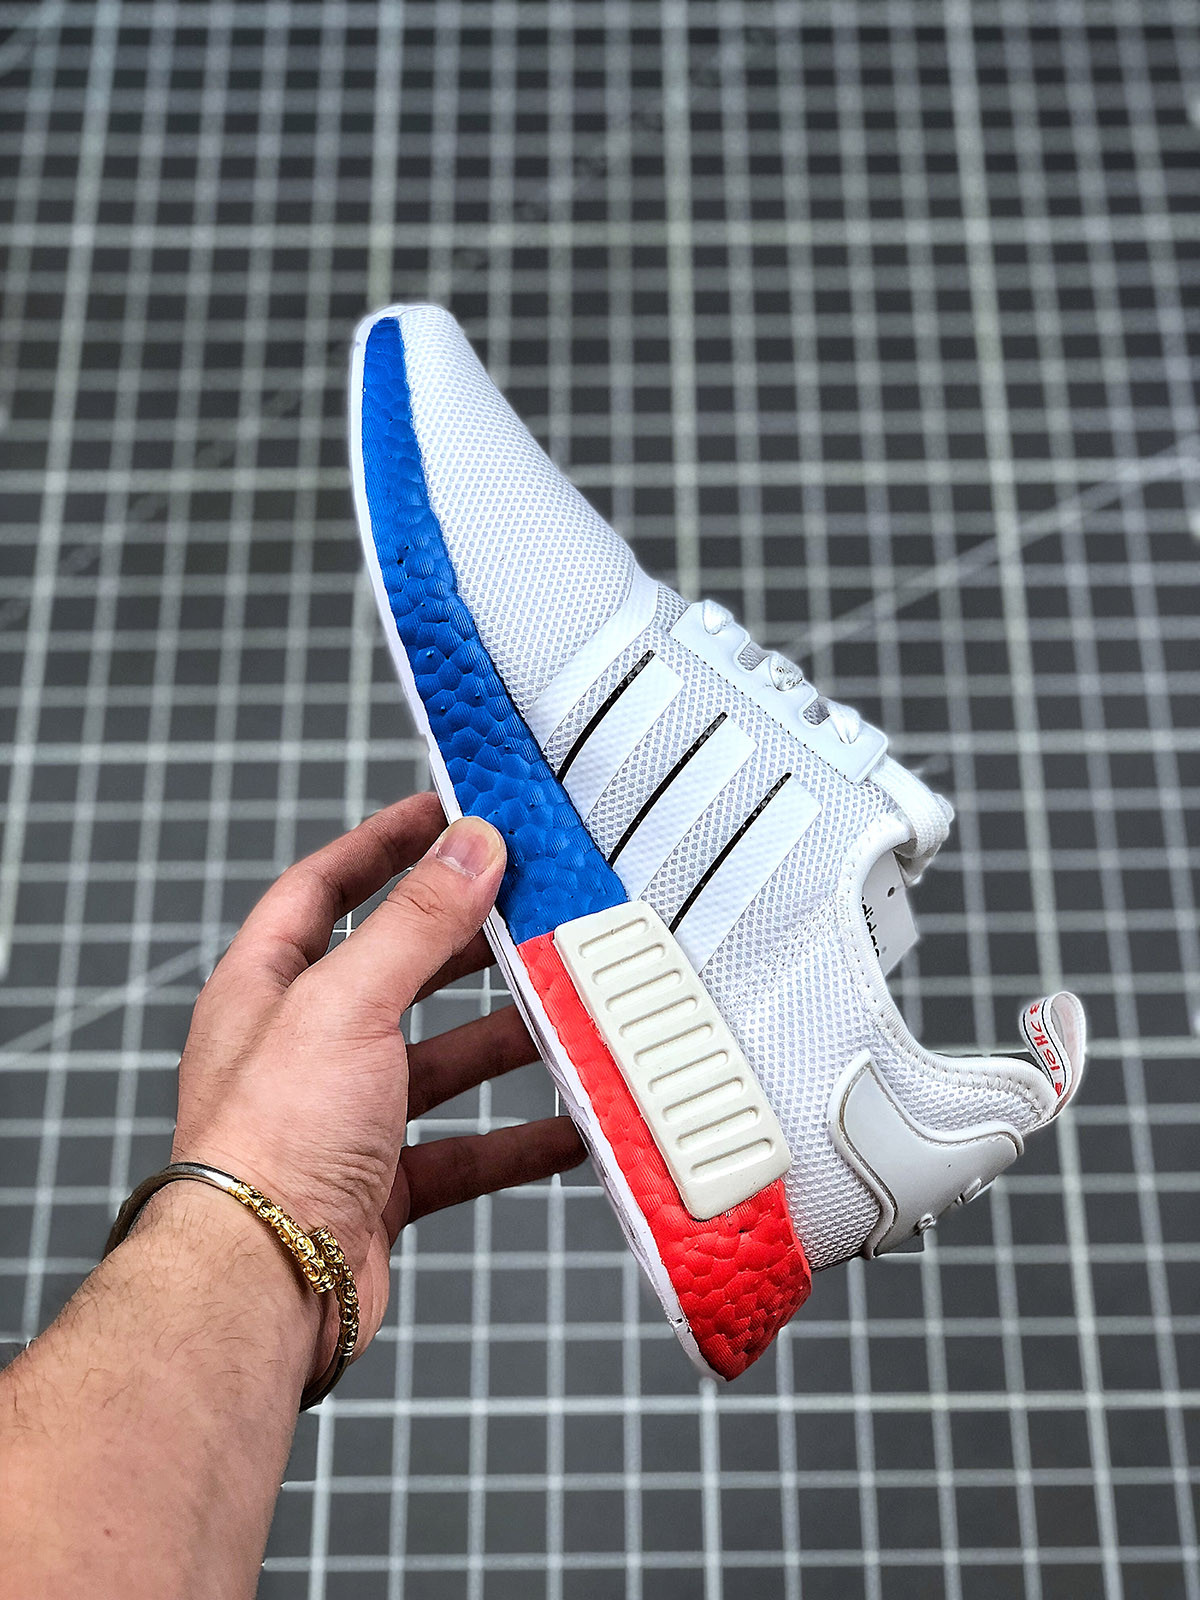 Adidas NMD R1 White Core BlackBlue FY1163 For Sale